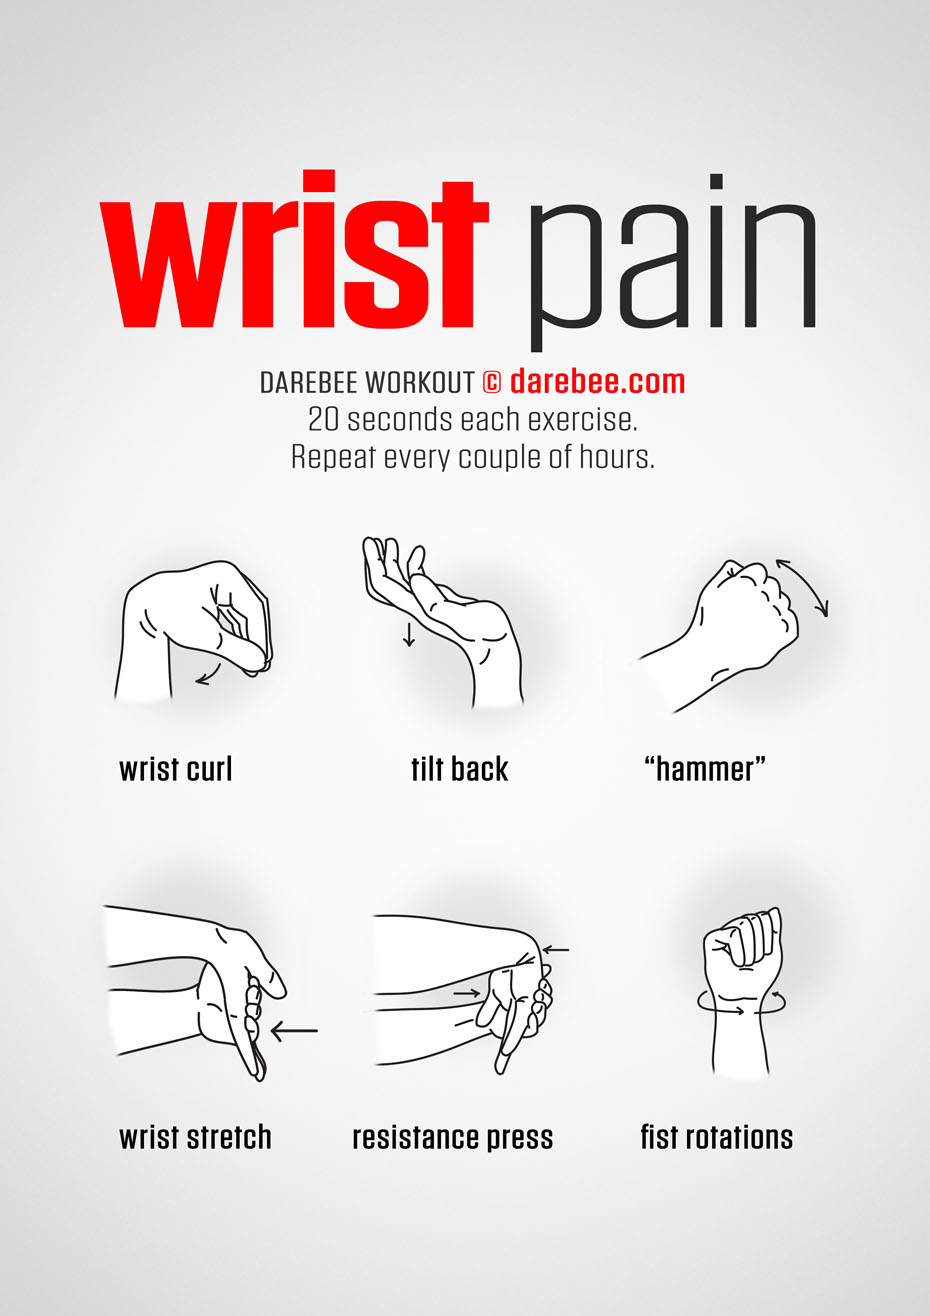 Wrist Pain Relief Exercises & Stretches 